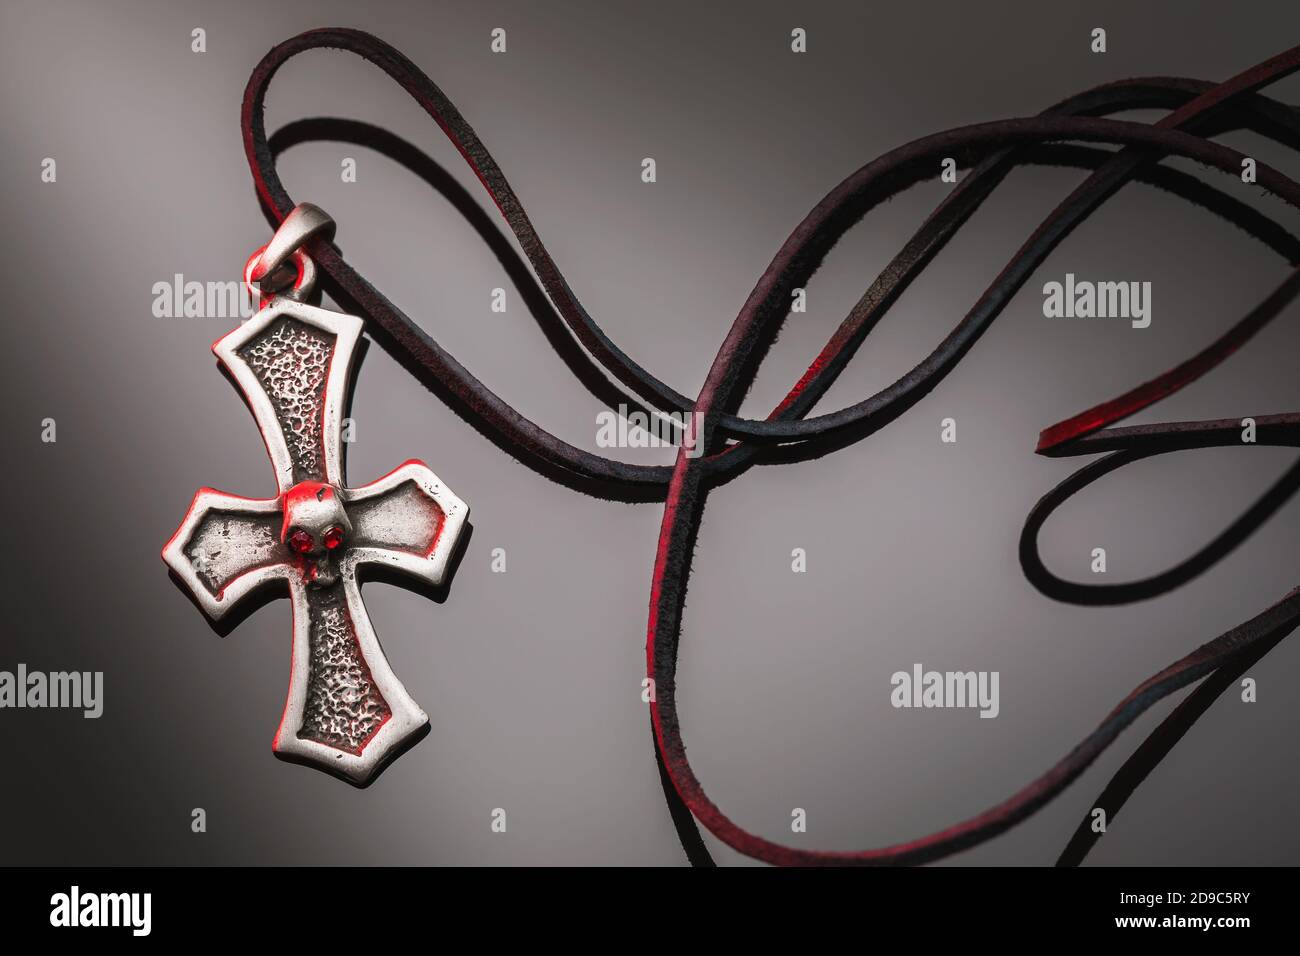 Metallic cross with leather lace on a dark gradient background Stock Photo